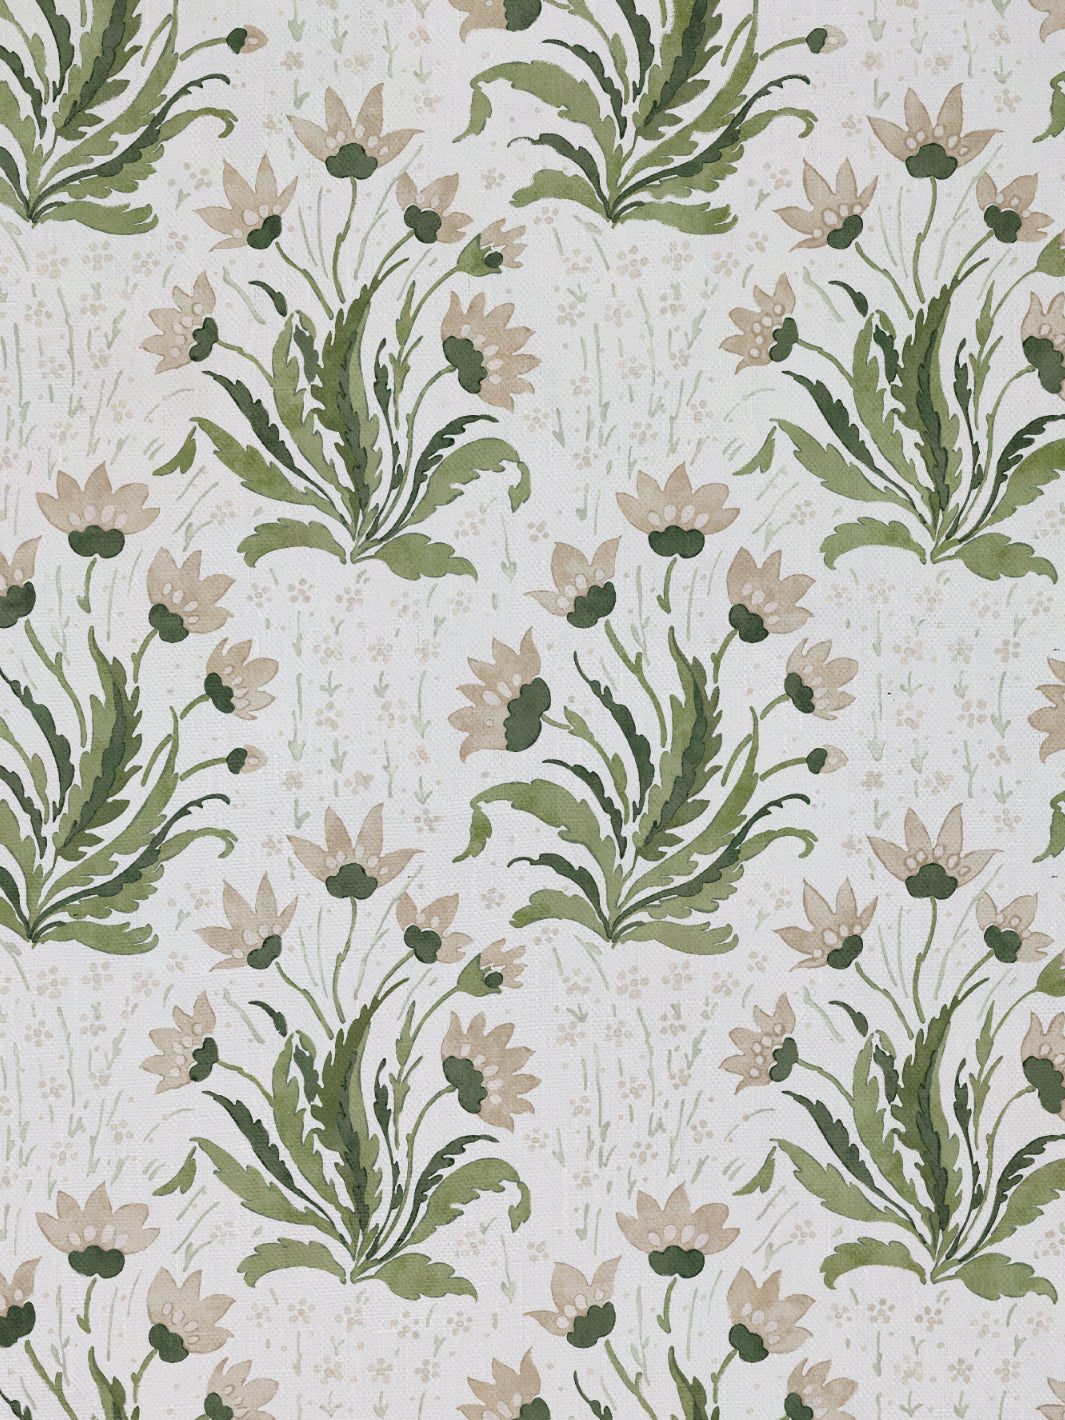 'Hillhouse Floral Multi' Linen Fabric by Nathan Turner - Neutral Green